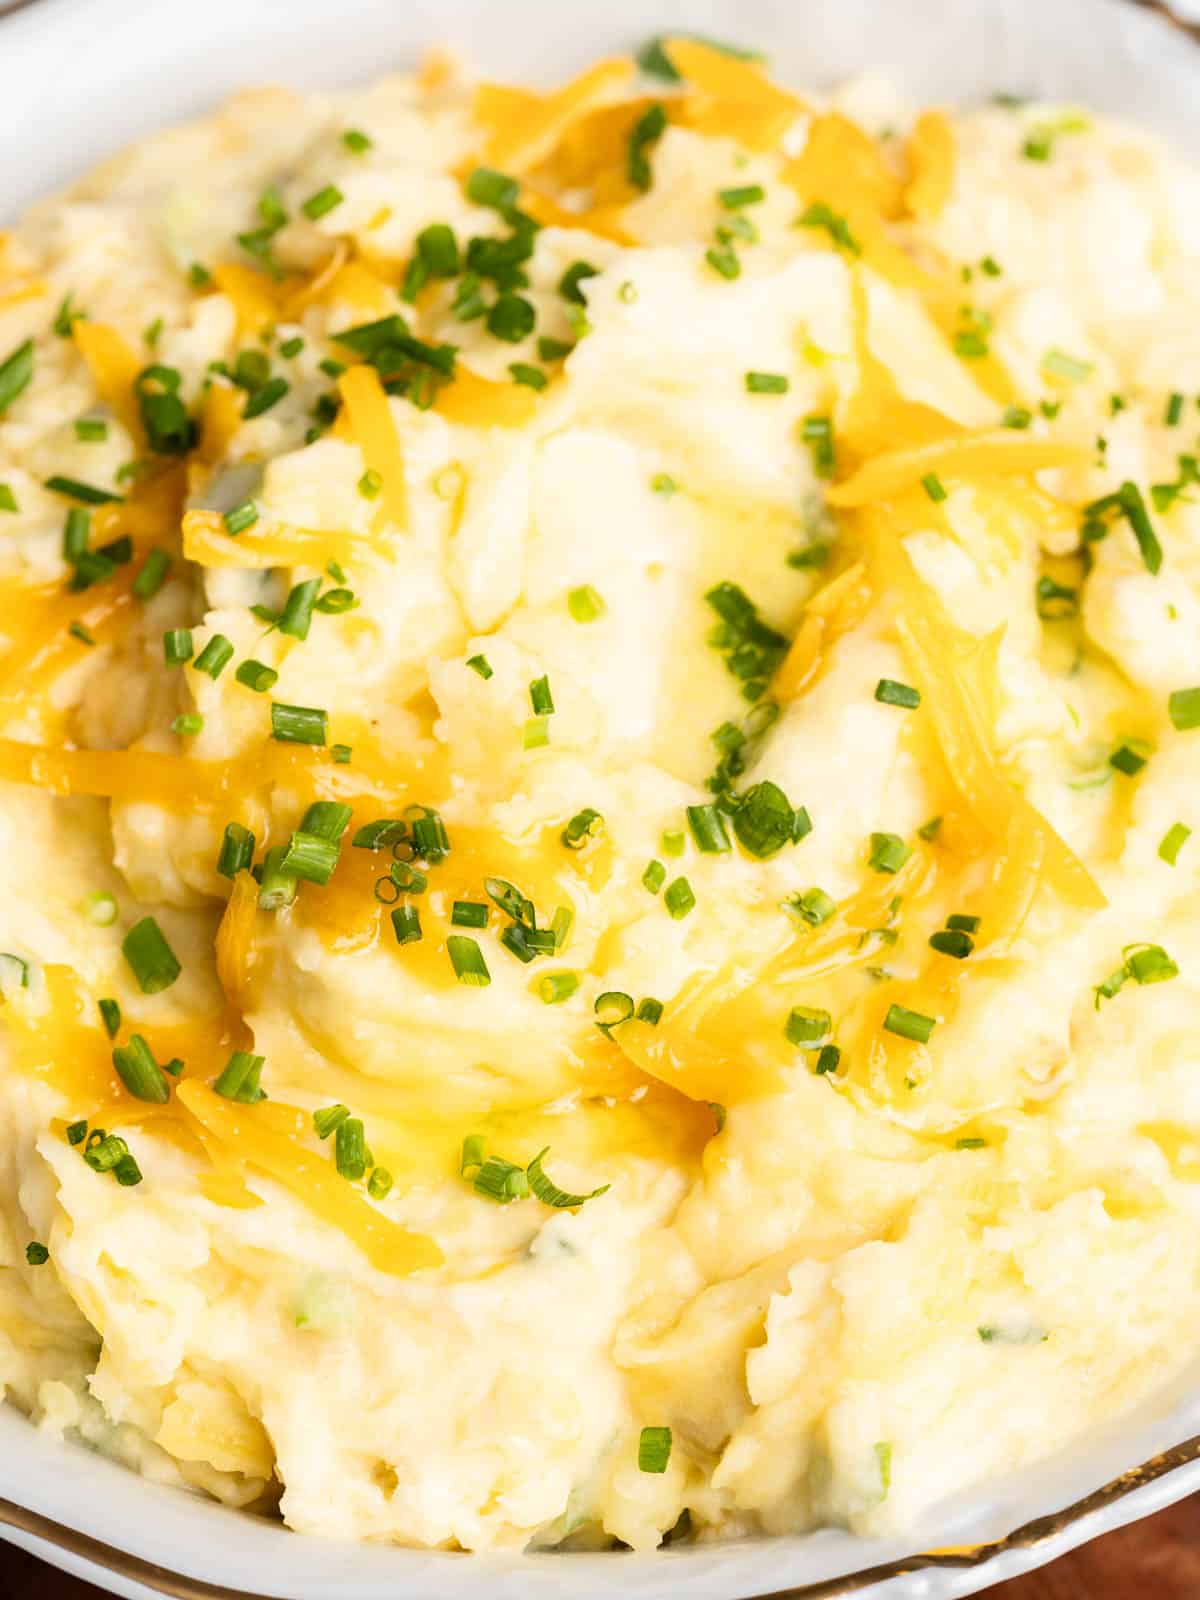 Mashed potatoes with cheese.